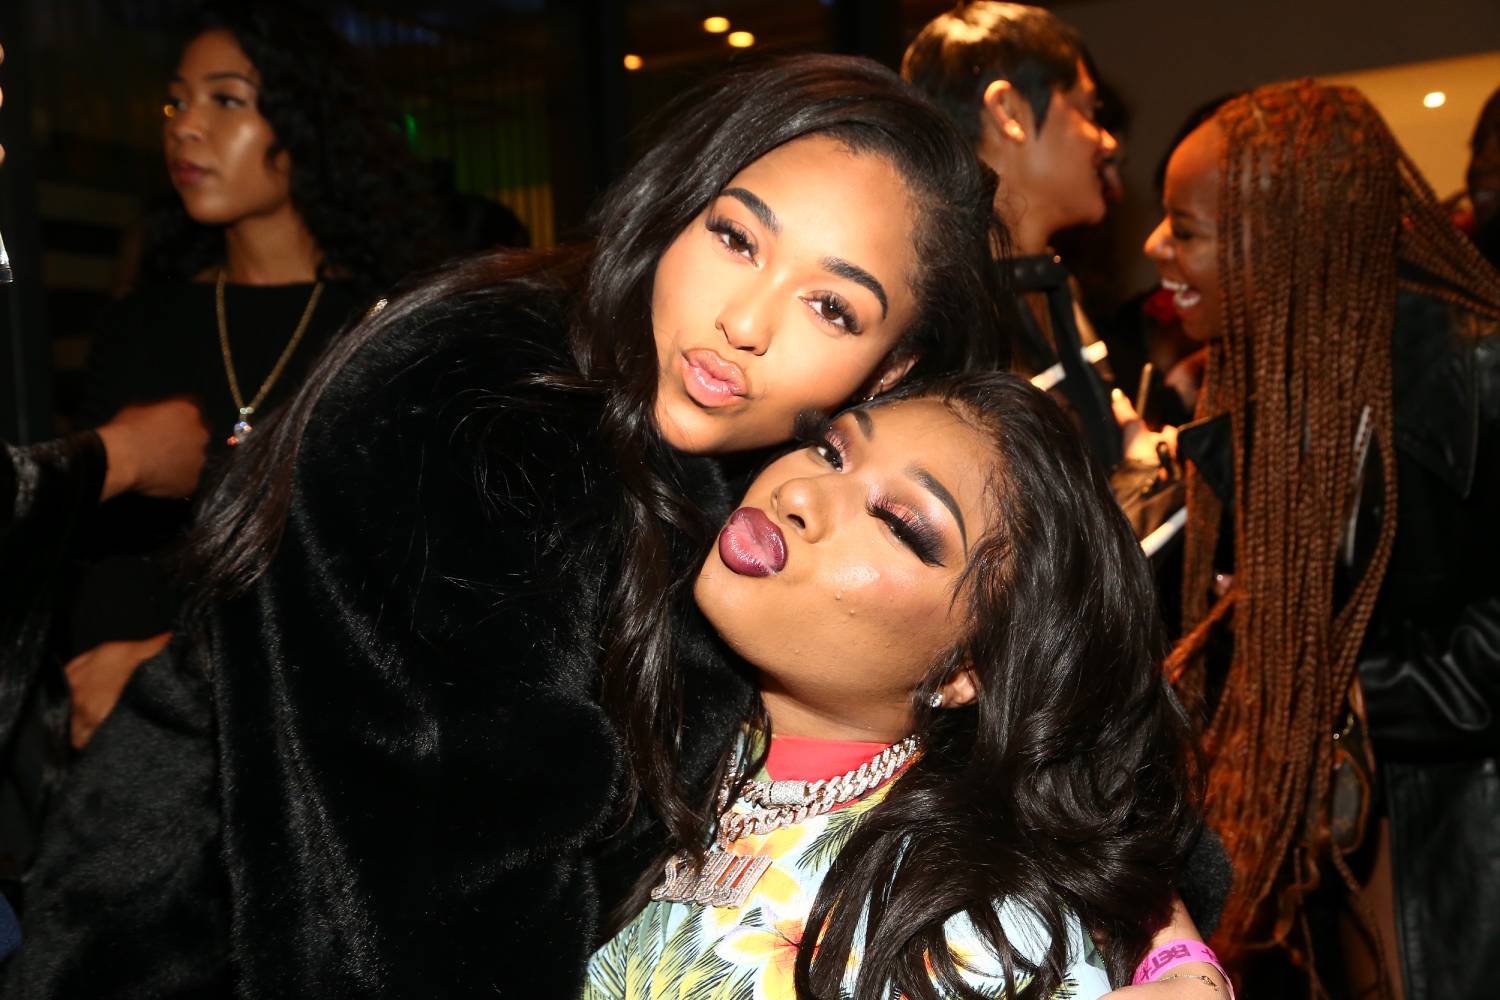 L-R Jordyn Woods and Megan Thee Stallion attend A Celebration of The Fearless Women in Music Hosted by YouTube Music and Megan Thee Stallion at Spring Studios on December 11, 2019 in Los Angeles, California.